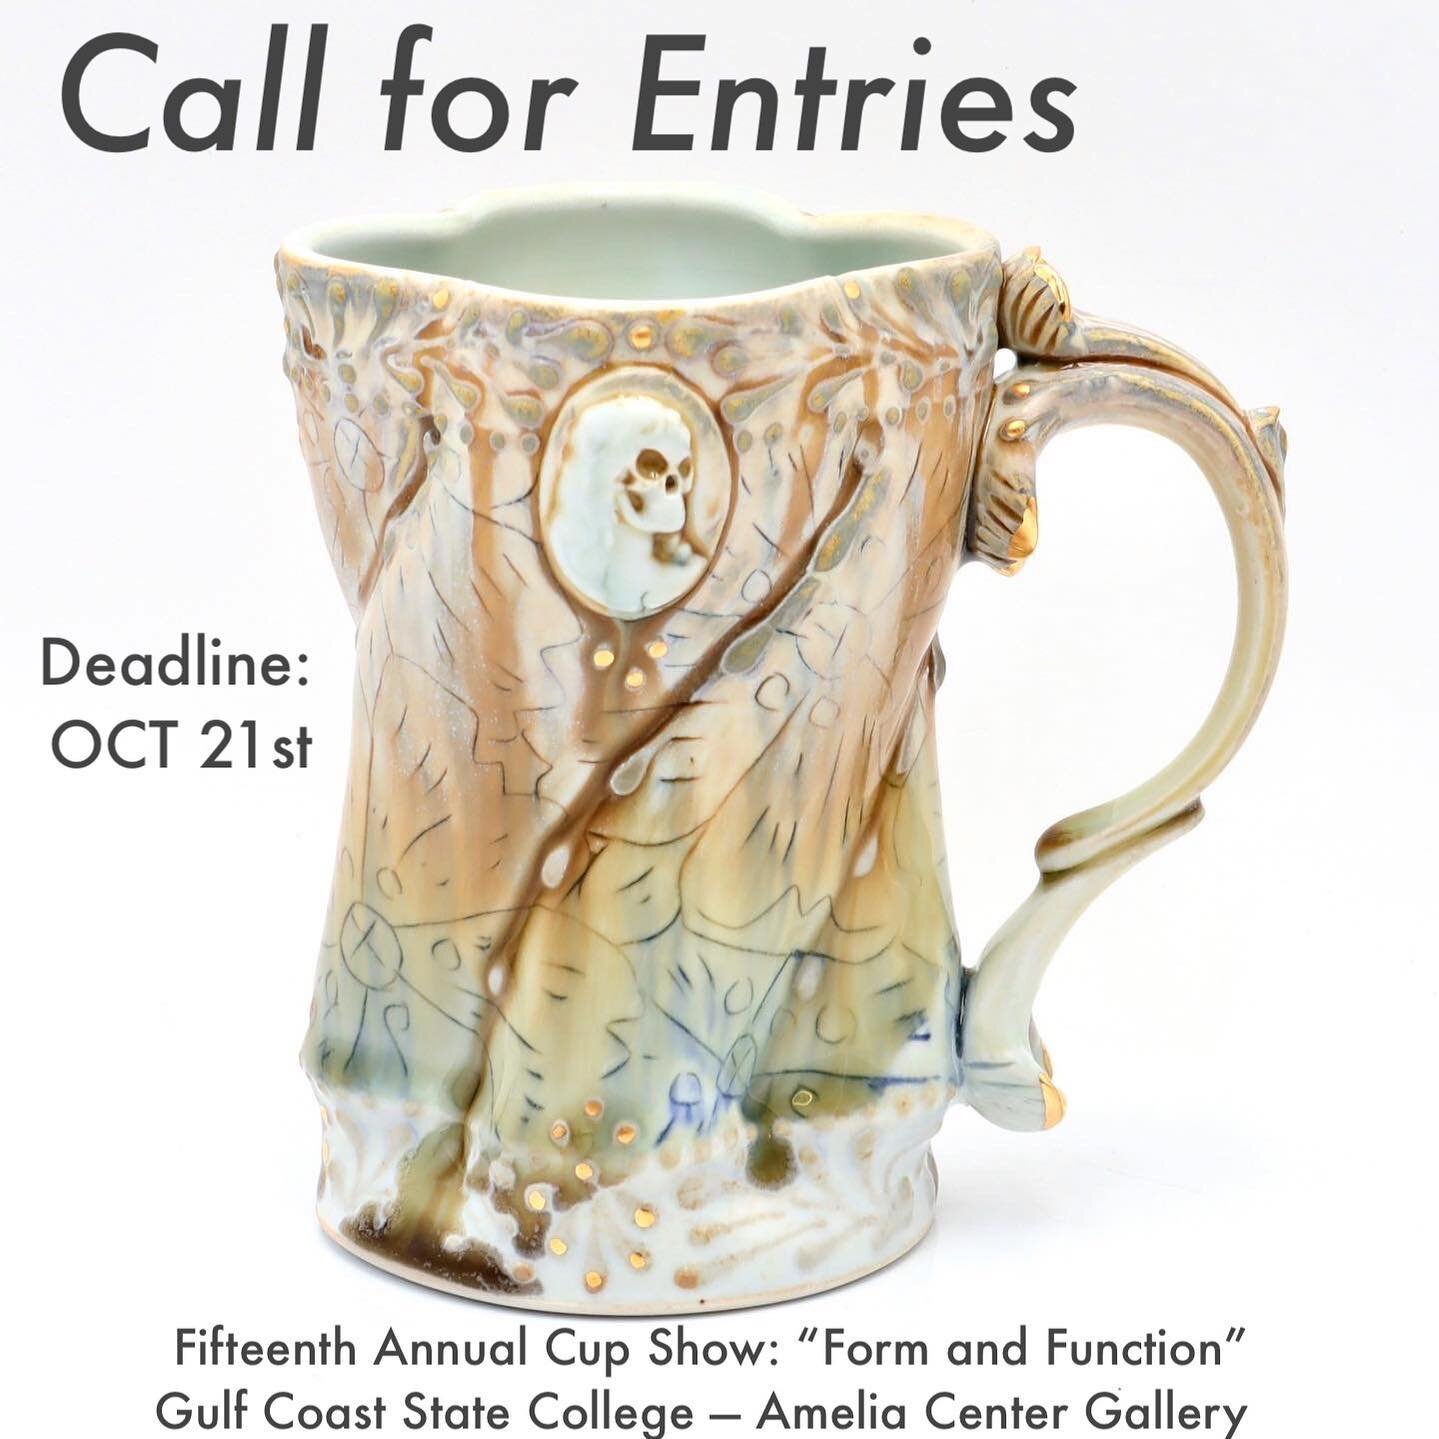 Hello friends and foes, grab a cup or two and go online to submit some images to the fifteenth annual cup show at Gulf Coast State College&rsquo;s @ameliacentergallery due October 21st!!
.
I want to see your cups, and there&rsquo;s a modest cash priz